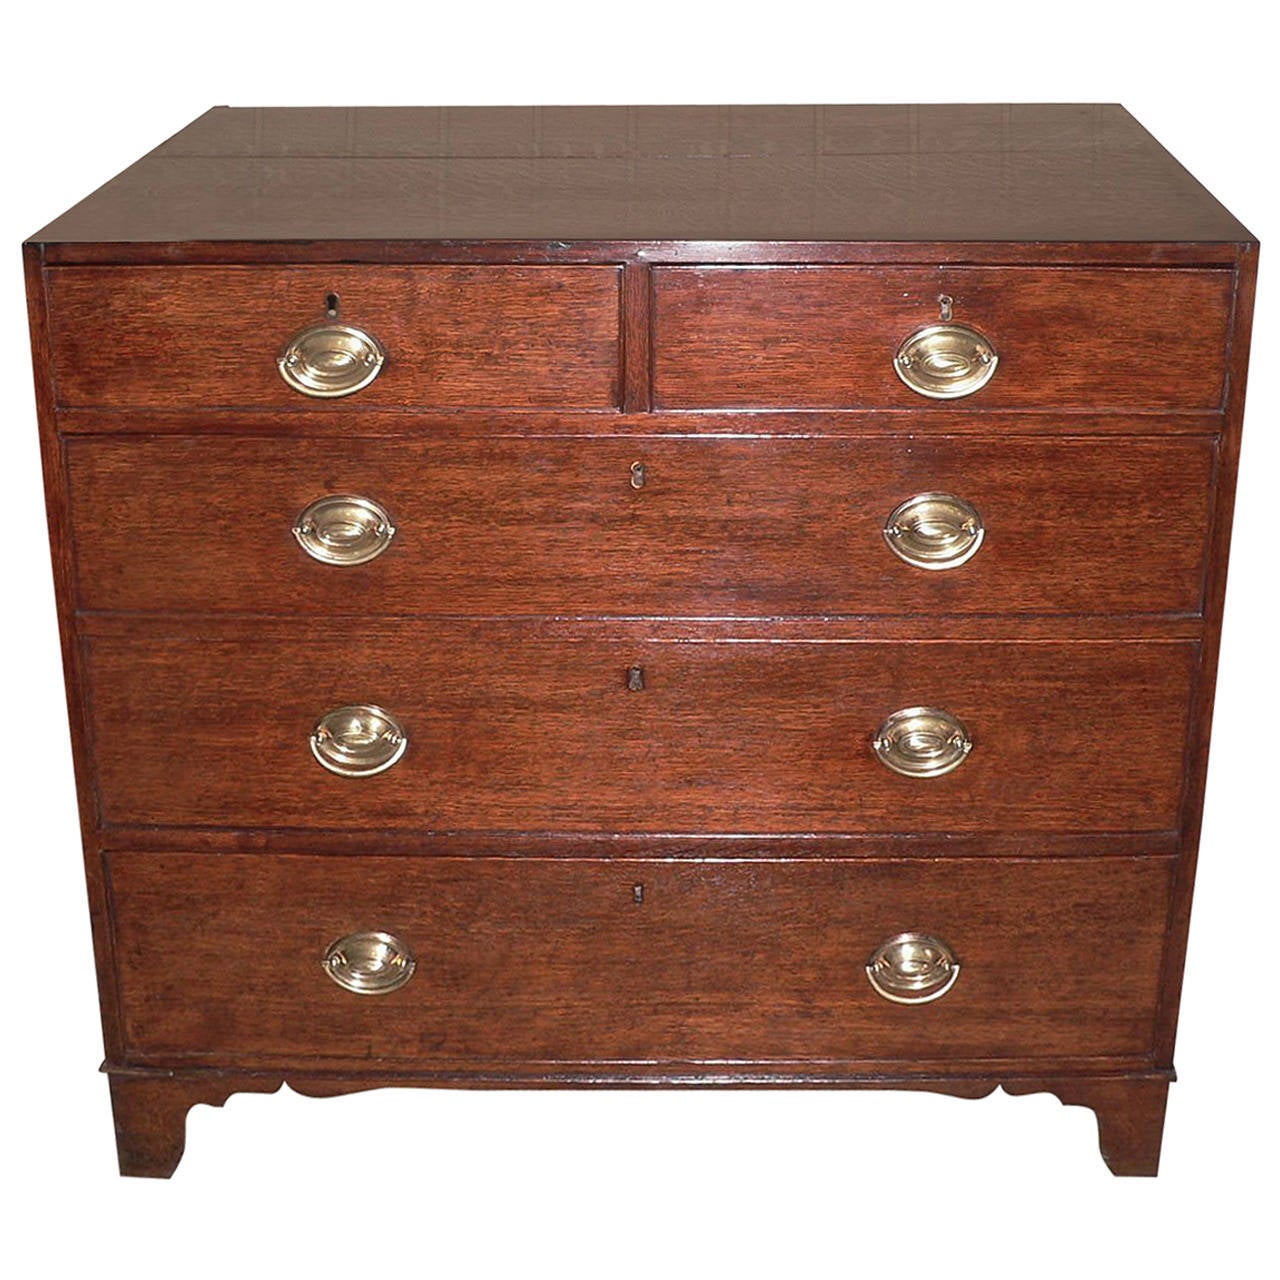 English Regency Period Oak Chest of Drawers